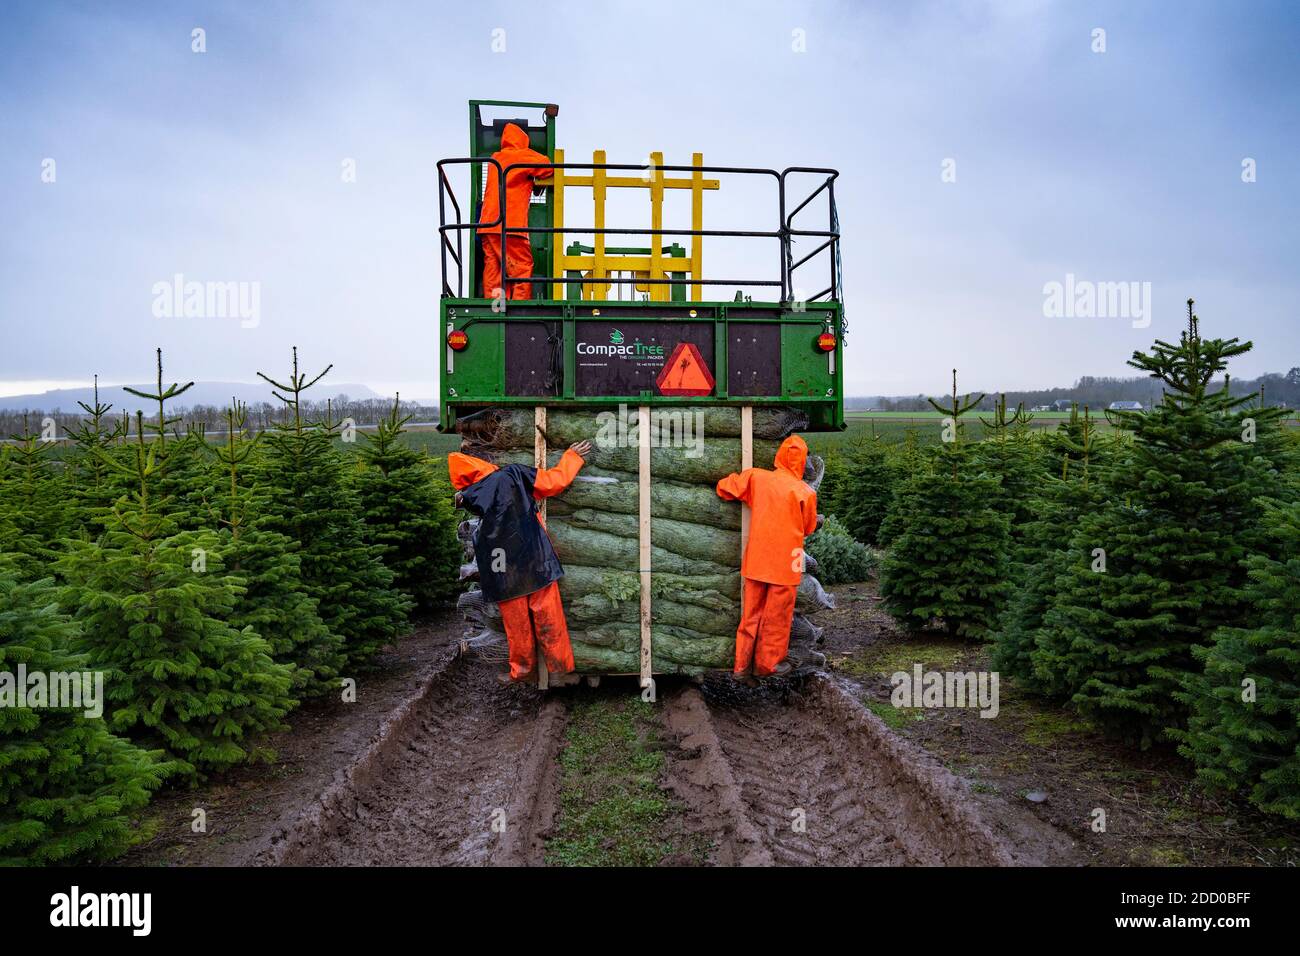 Milnathort, Scotland, UK. 23 November 2020. Christmas trees are being harvested in a plantation near Milnathort in Perth and Kinross. The plantation is operated by the Kilted Tree Company based at Tillyochie Farm near Milnathort. Workers cut selected trees and these are fitted inside protective sleeves using specialist machinery on tractors before being transported to market.  Iain Masterton/Alamy Live News Stock Photo